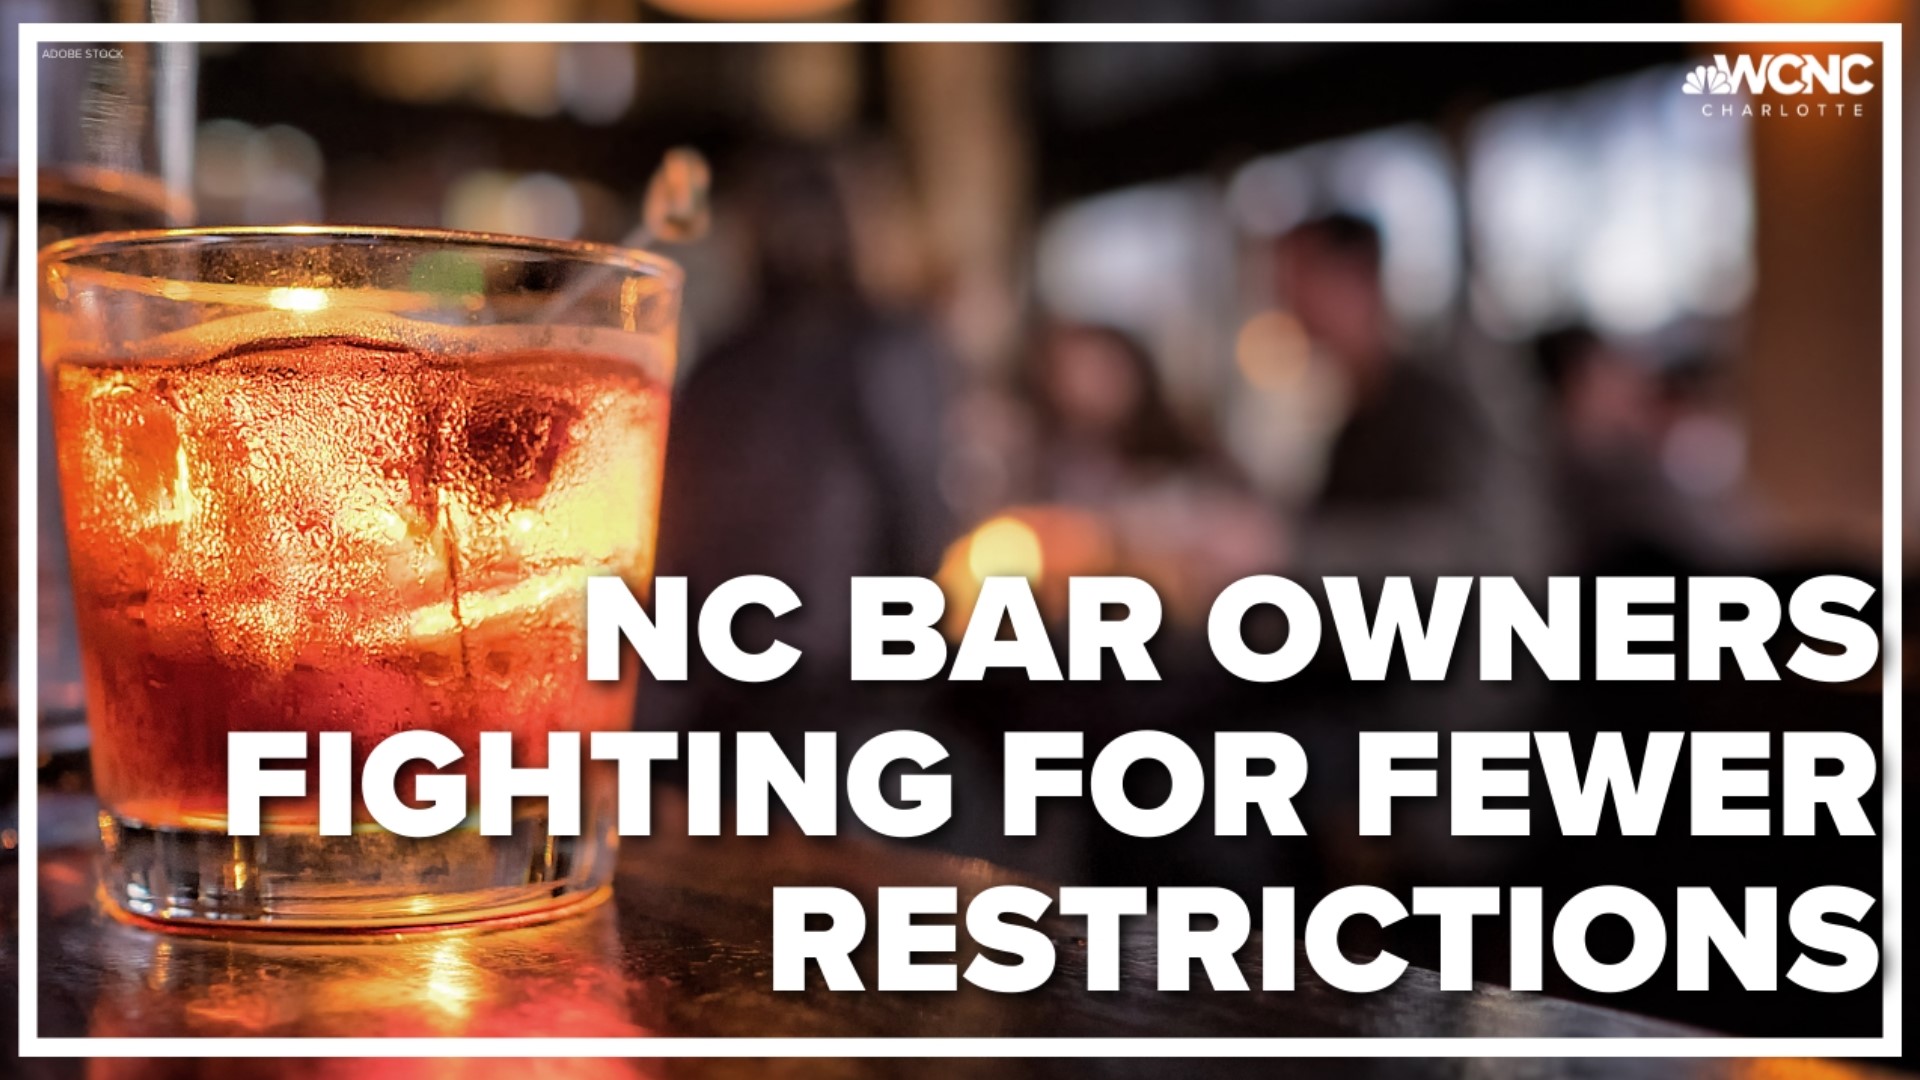 If you're looking for a happy hour drink deal in North Carolina, you're not going to find one -- thanks to state law.